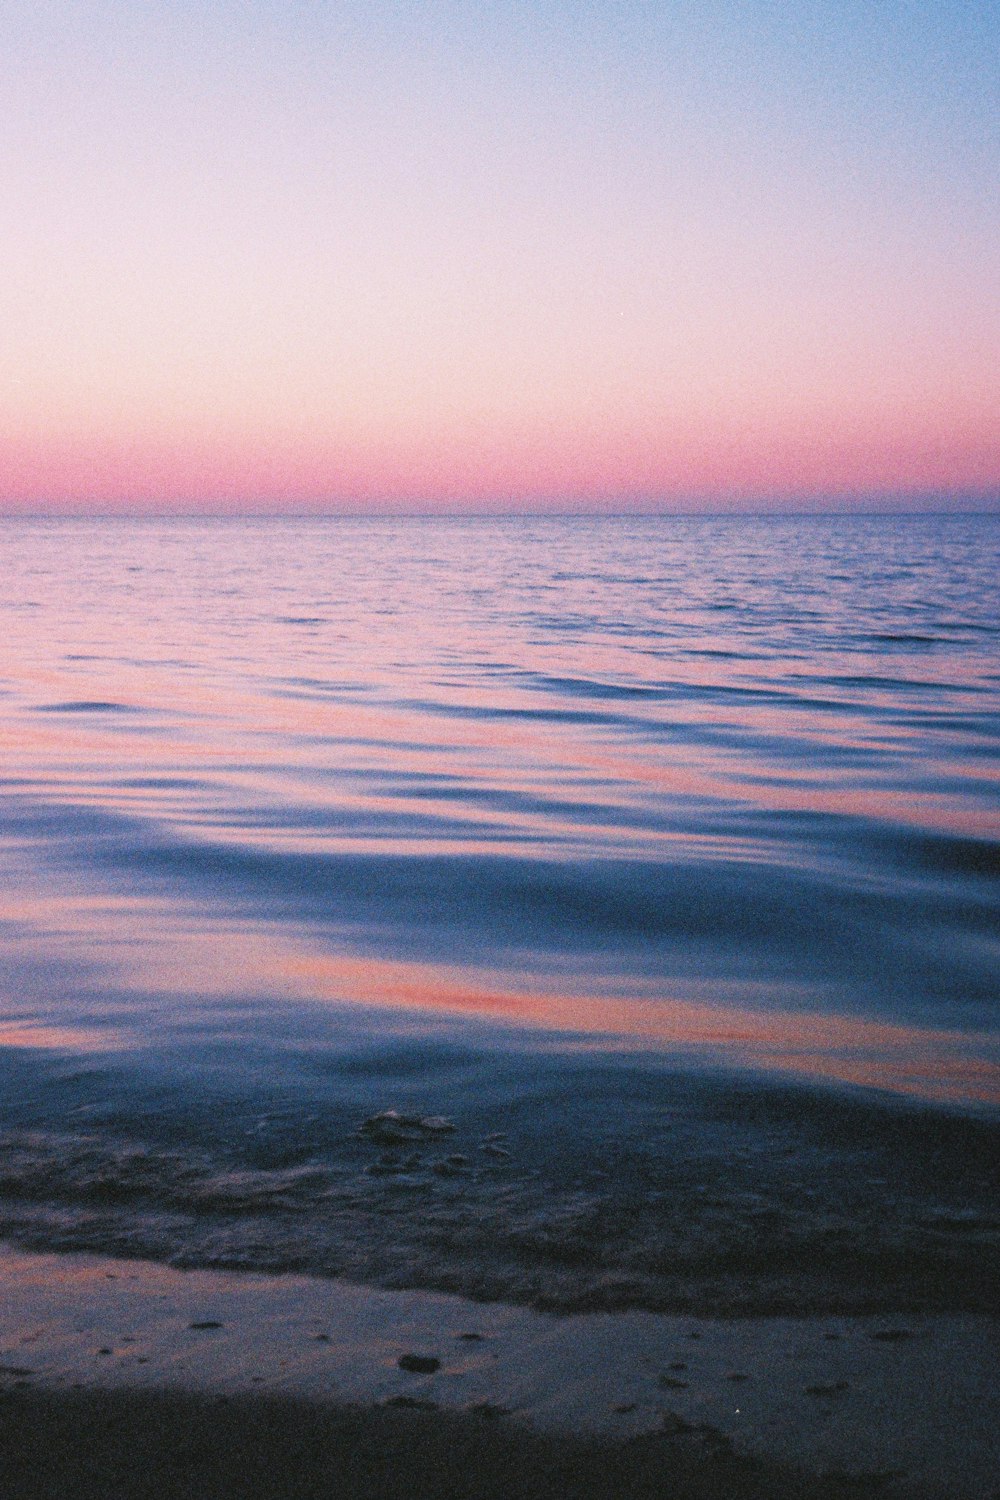 a body of water with a pink sky in the background